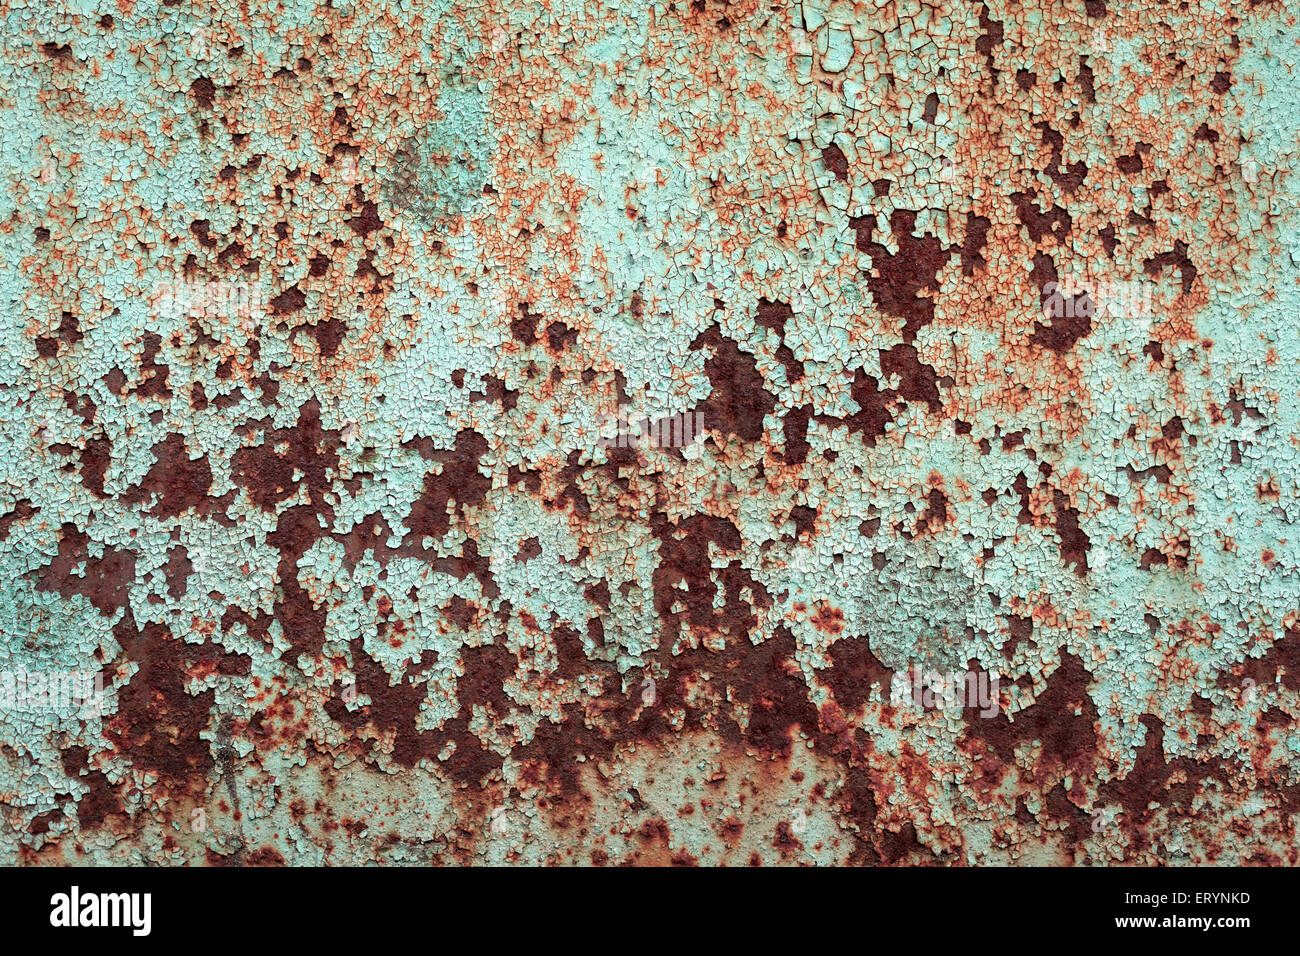 abstract corroded colorful wallpaper grunge background iron rusty artistic wall peeling paint. Oxidized metal surface. Abstract Stock Photo